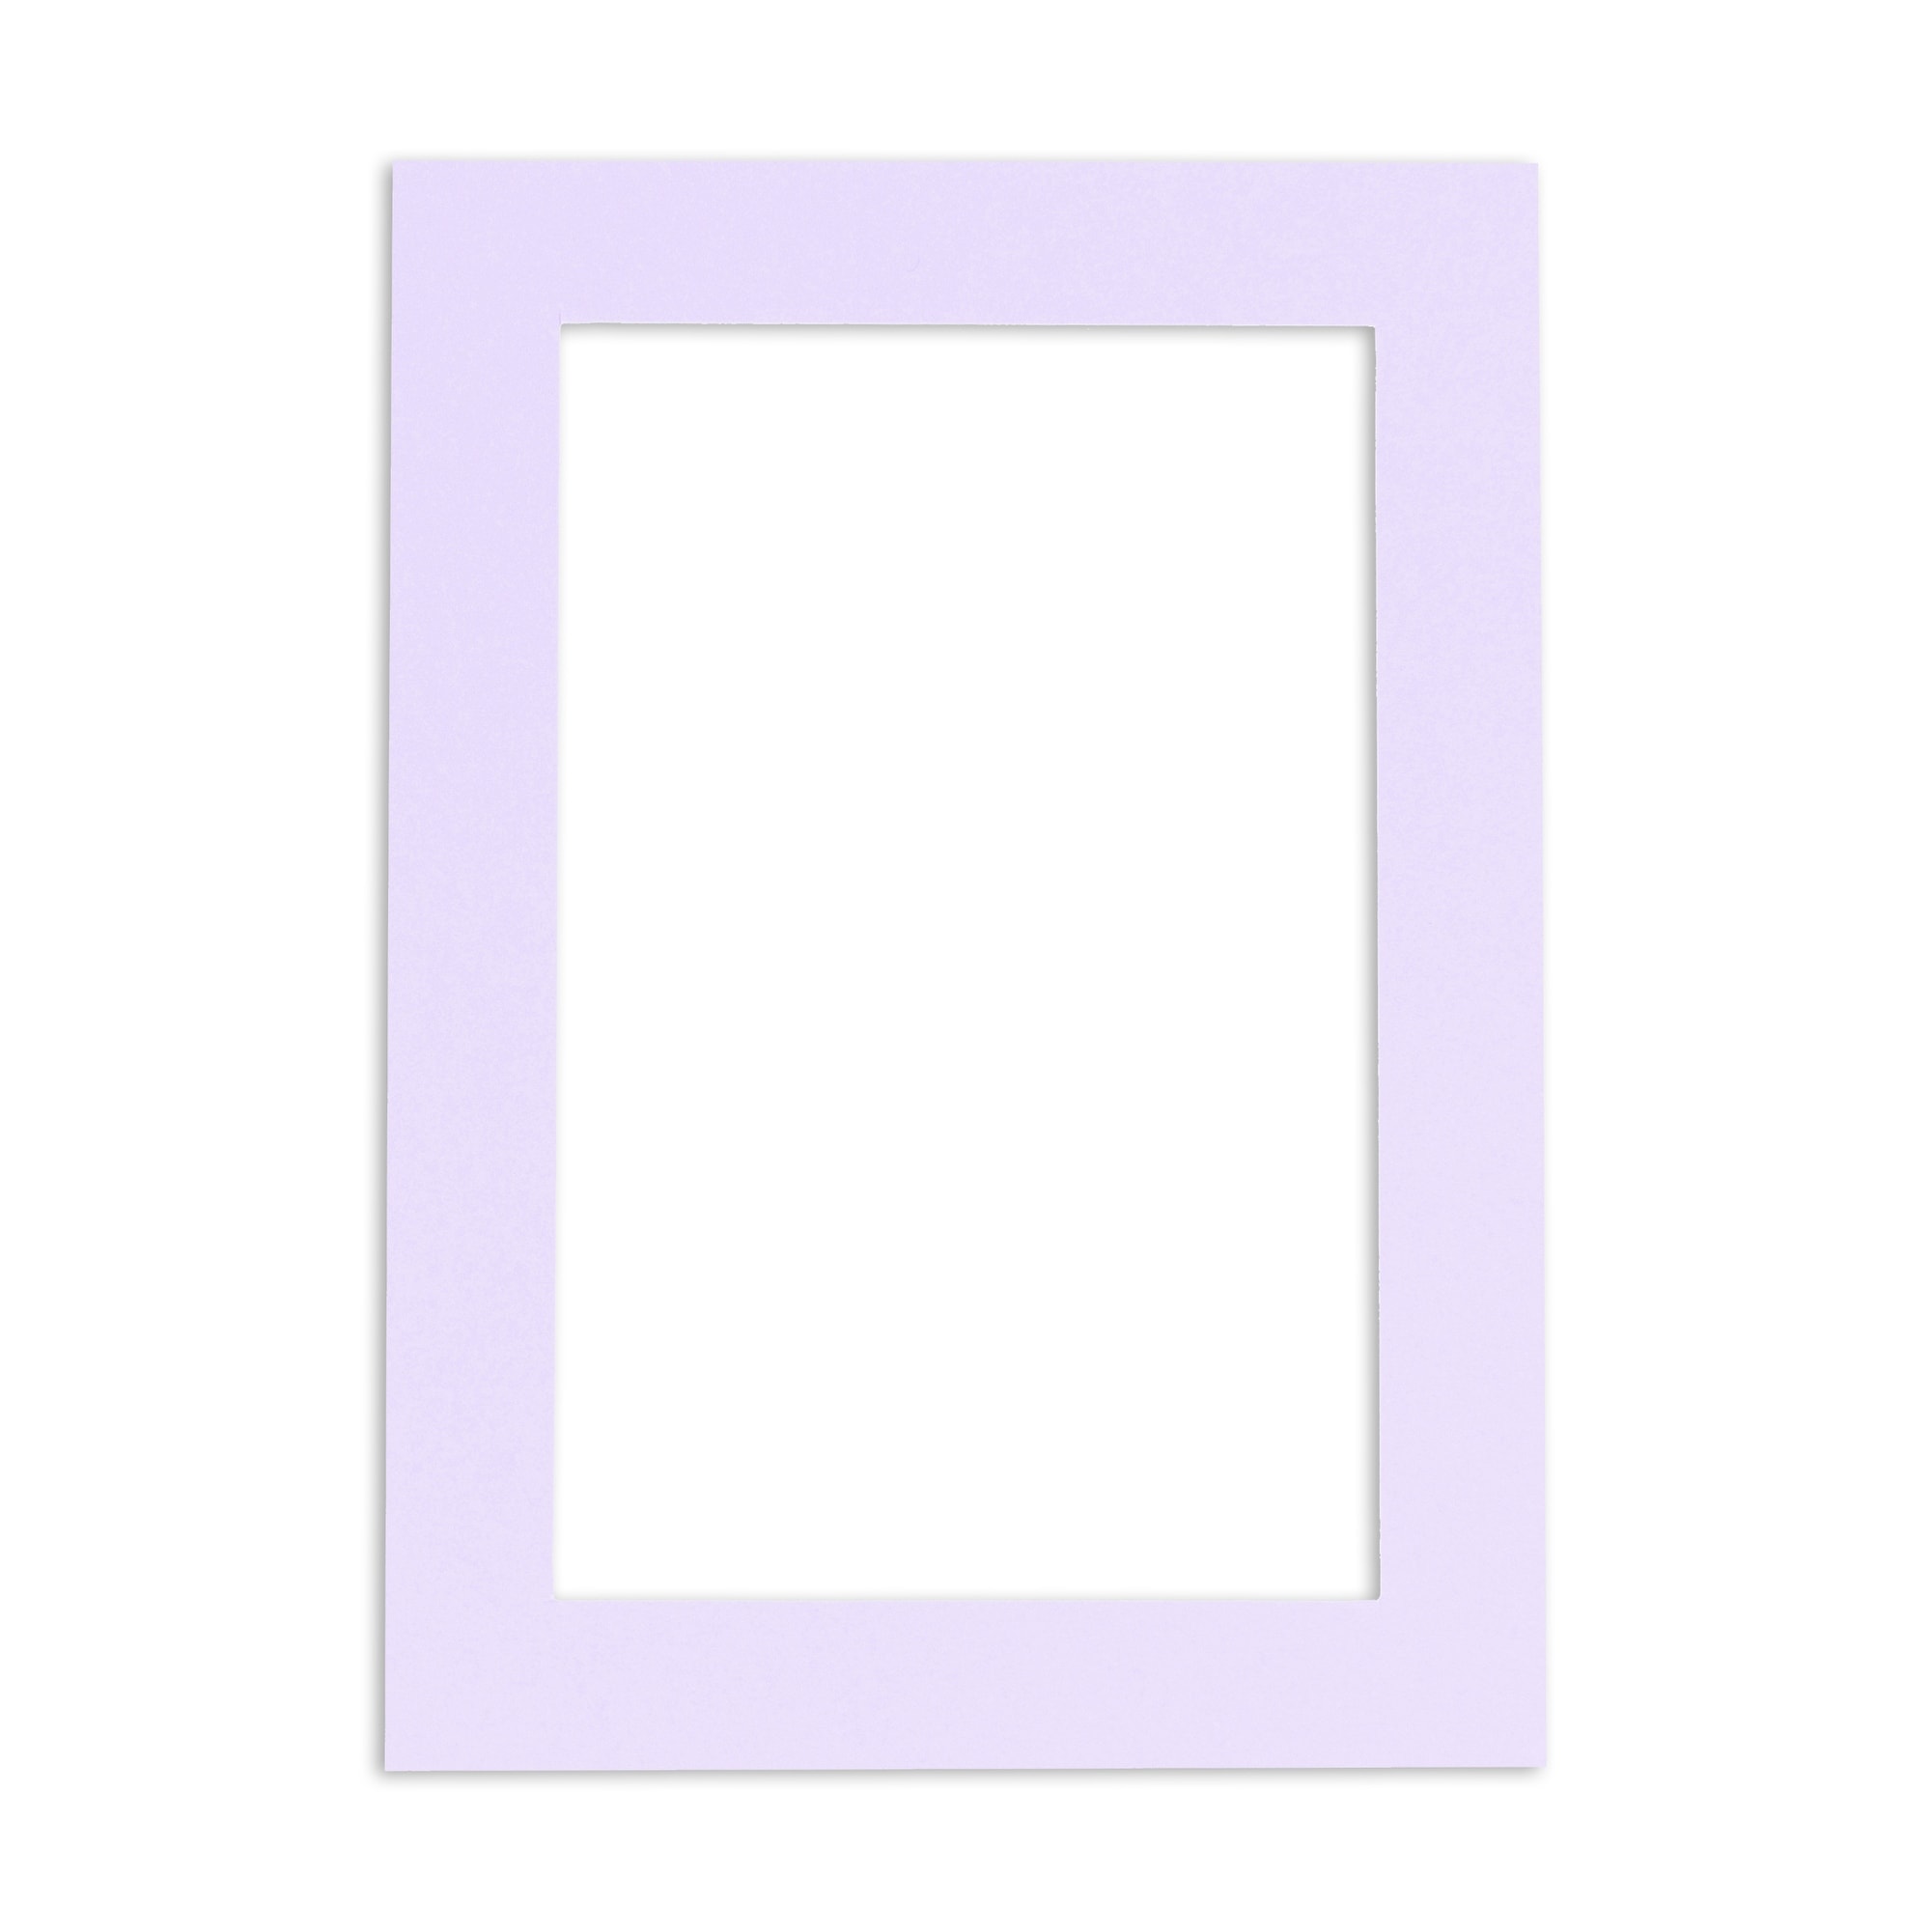 Archival matting to fit 16x20 picture frames with one window